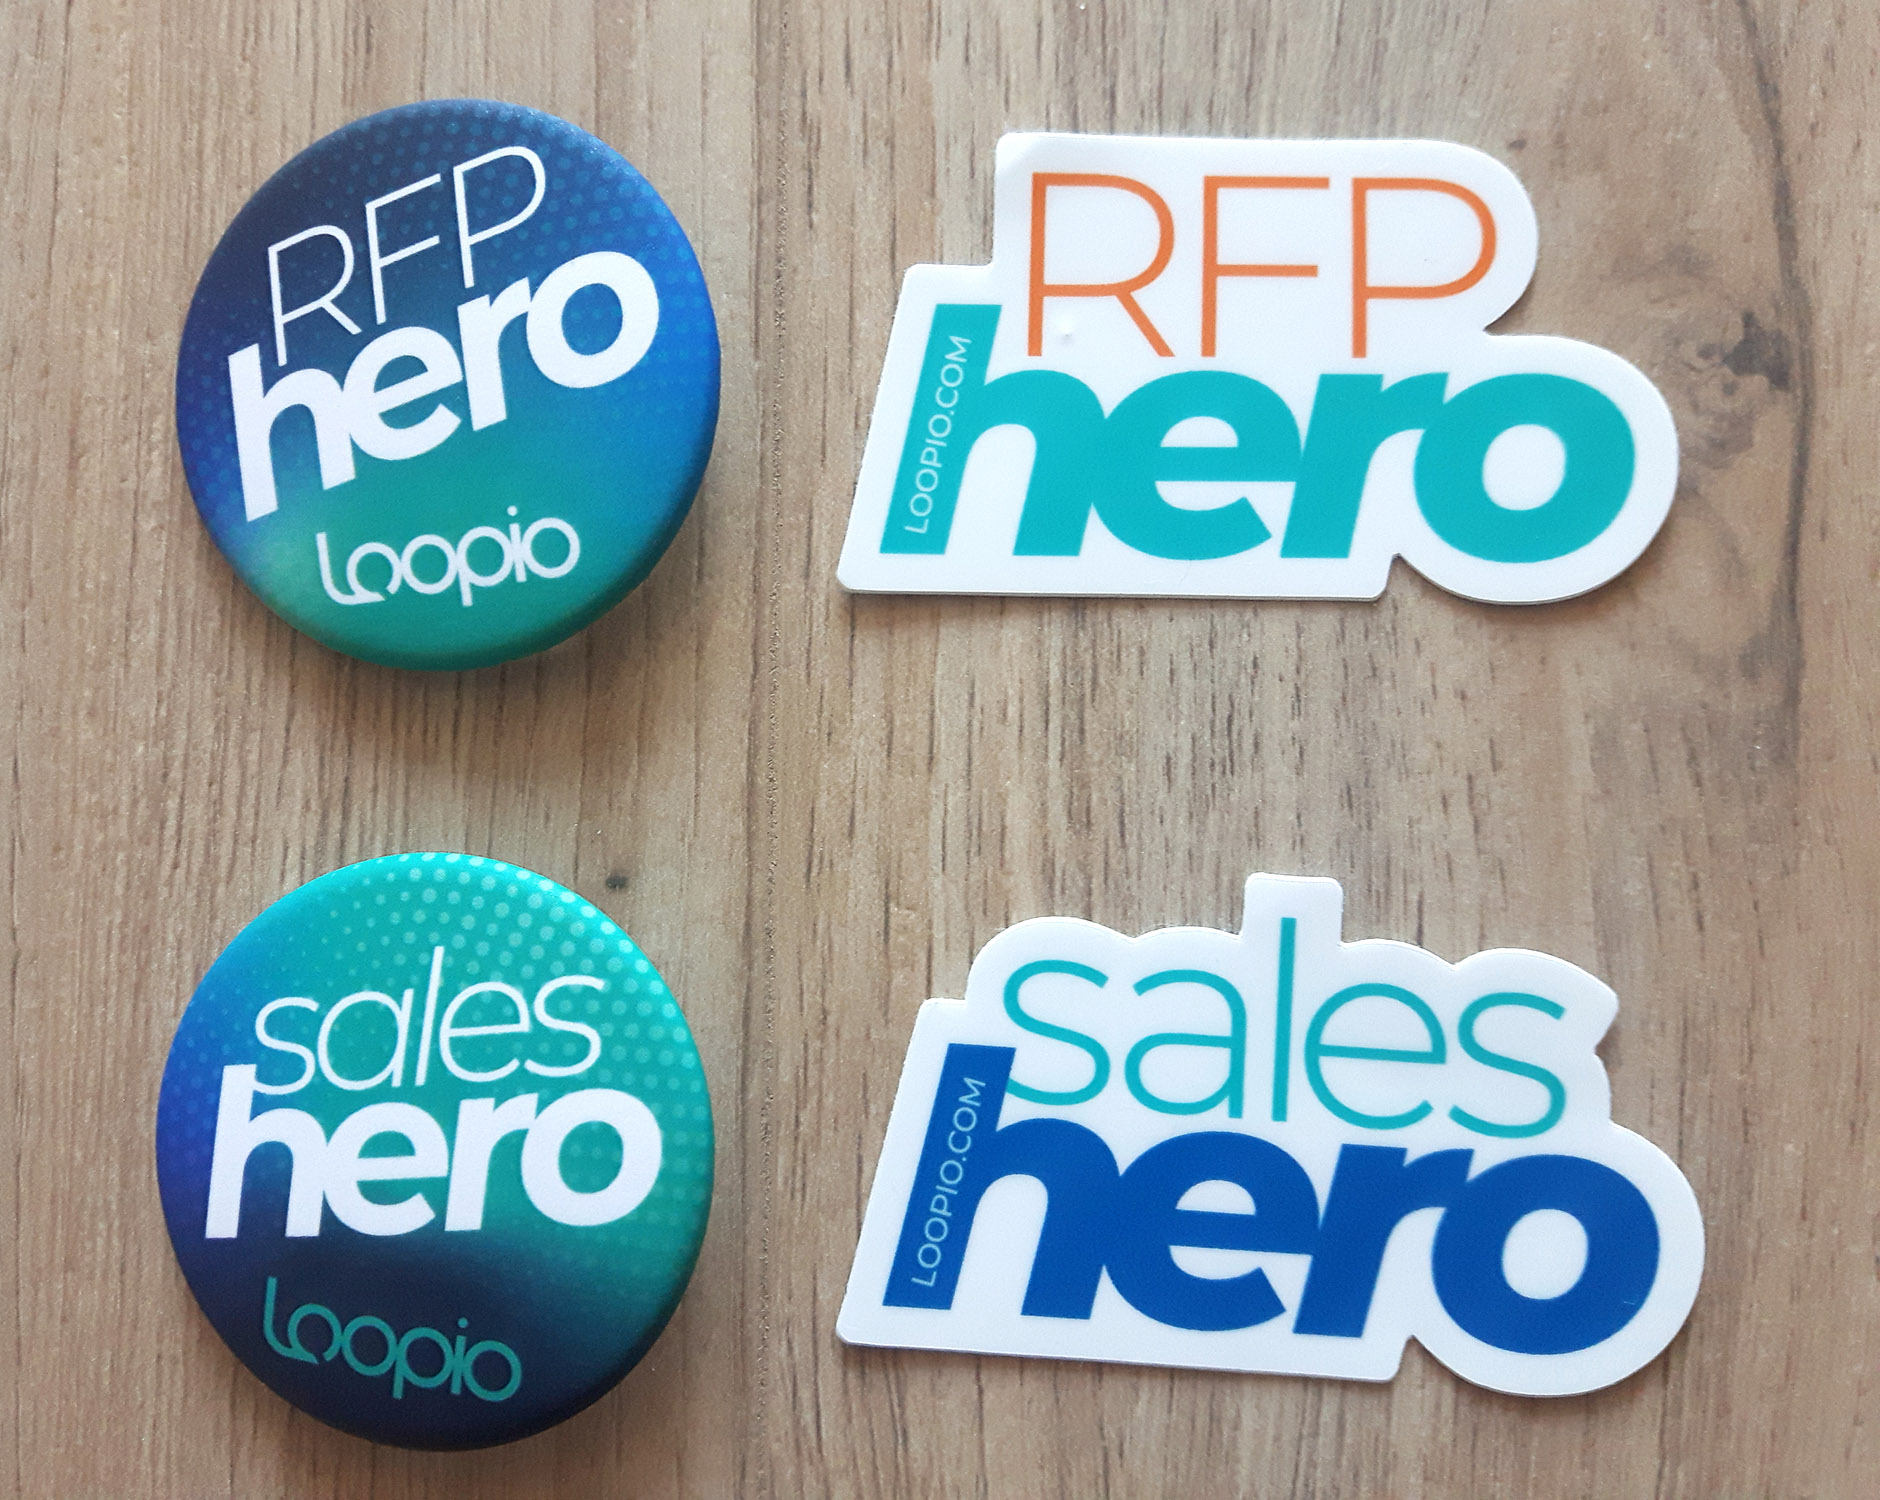 Two pins and two stickers for RFP and Sales Heroes